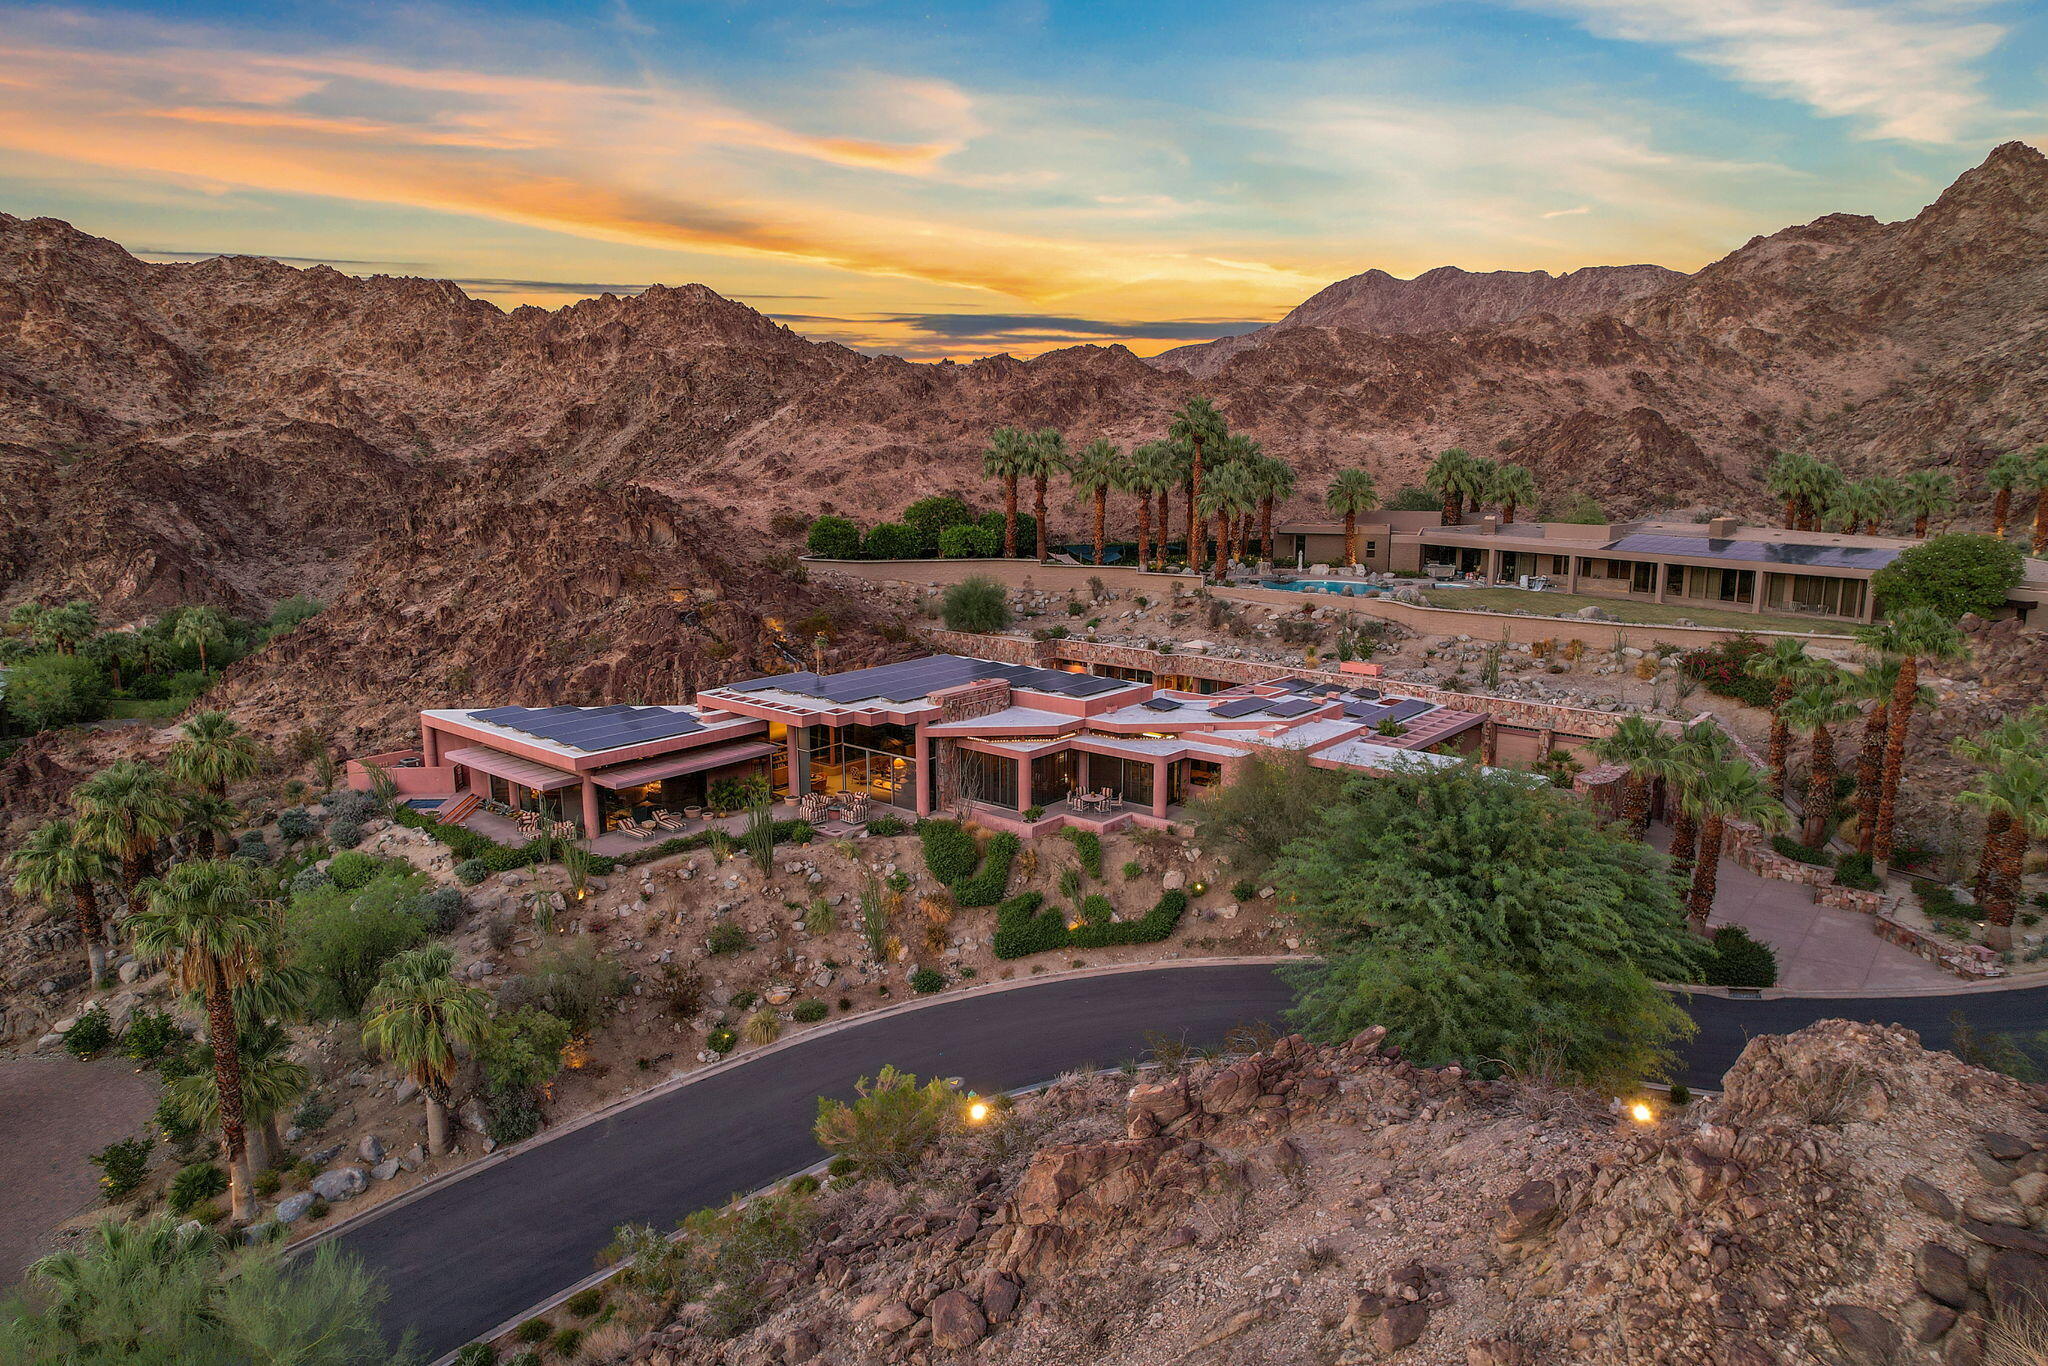 This contemporary compound within the gates of the renowned Vintage Club features scale and volume rarely found. Embedded into the natural mountain terrain, floor to ceiling windows and doors boast expansive views of the desert below. Situated on a 52,836 square foot lot, the 7,258 square foot layout offers a seductive and spacious silhouette with a natural flow into oversized living spaces including, a sunken living room with fireplace, a formal dining area, and a gourmet chef's kitchen, all complemented by windows showcasing the dramatic backdrop. Four ensuite bedrooms, including a primary suite with picturesque vistas, surround the pool offering a seamless transition of indoor-outdoor living that only the desert can provide. Two guest suites share a common sitting area and kitchenette with a private entry. An owned solar grid minimizes maintenance costs. The prime location and unique infrastructure poses an opportunity for customization and personal touch.